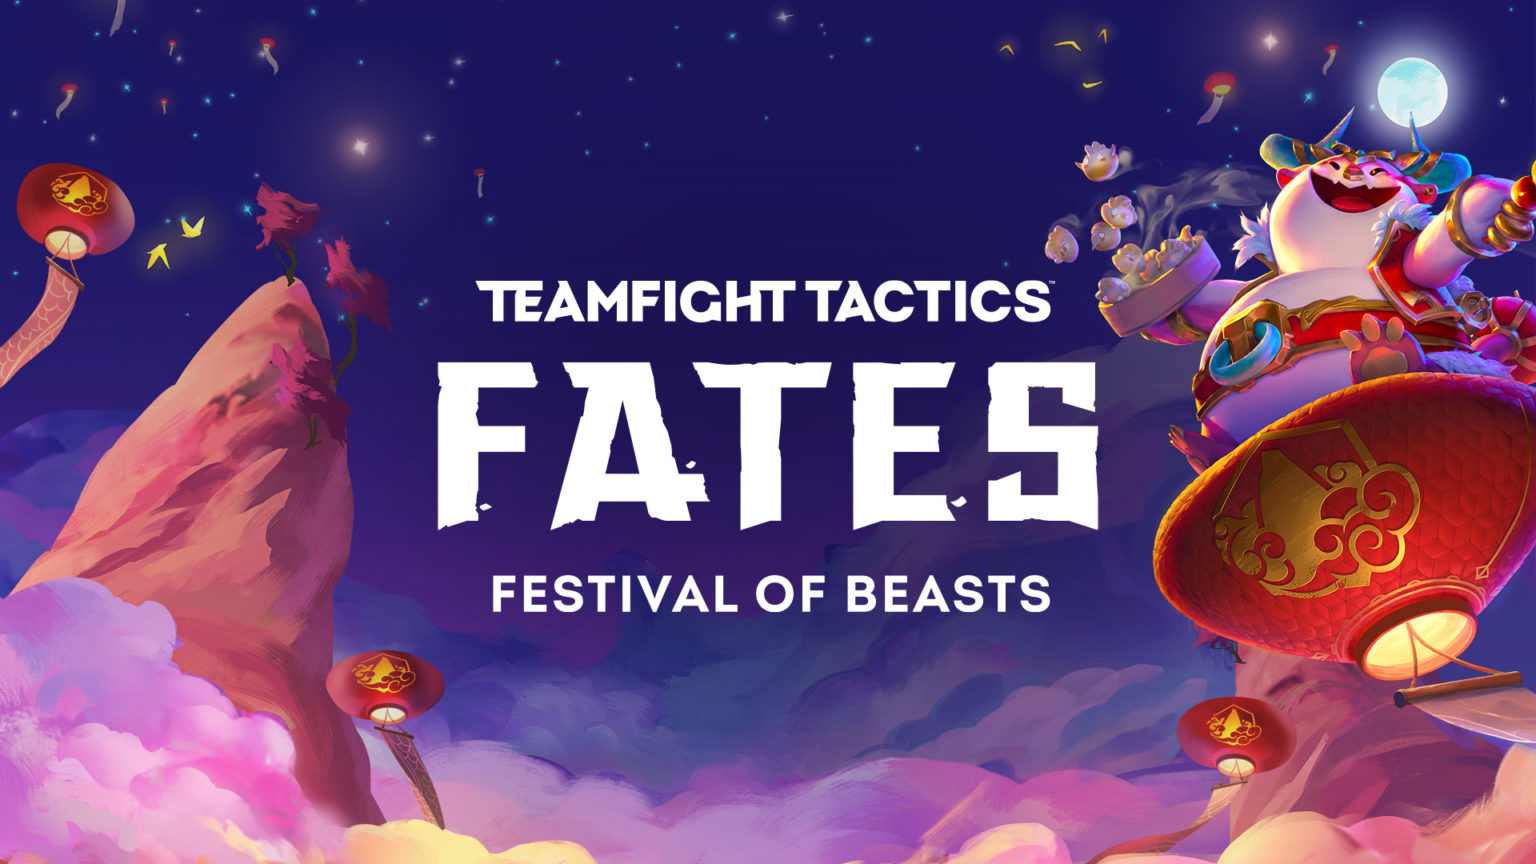 Festival of Beasts